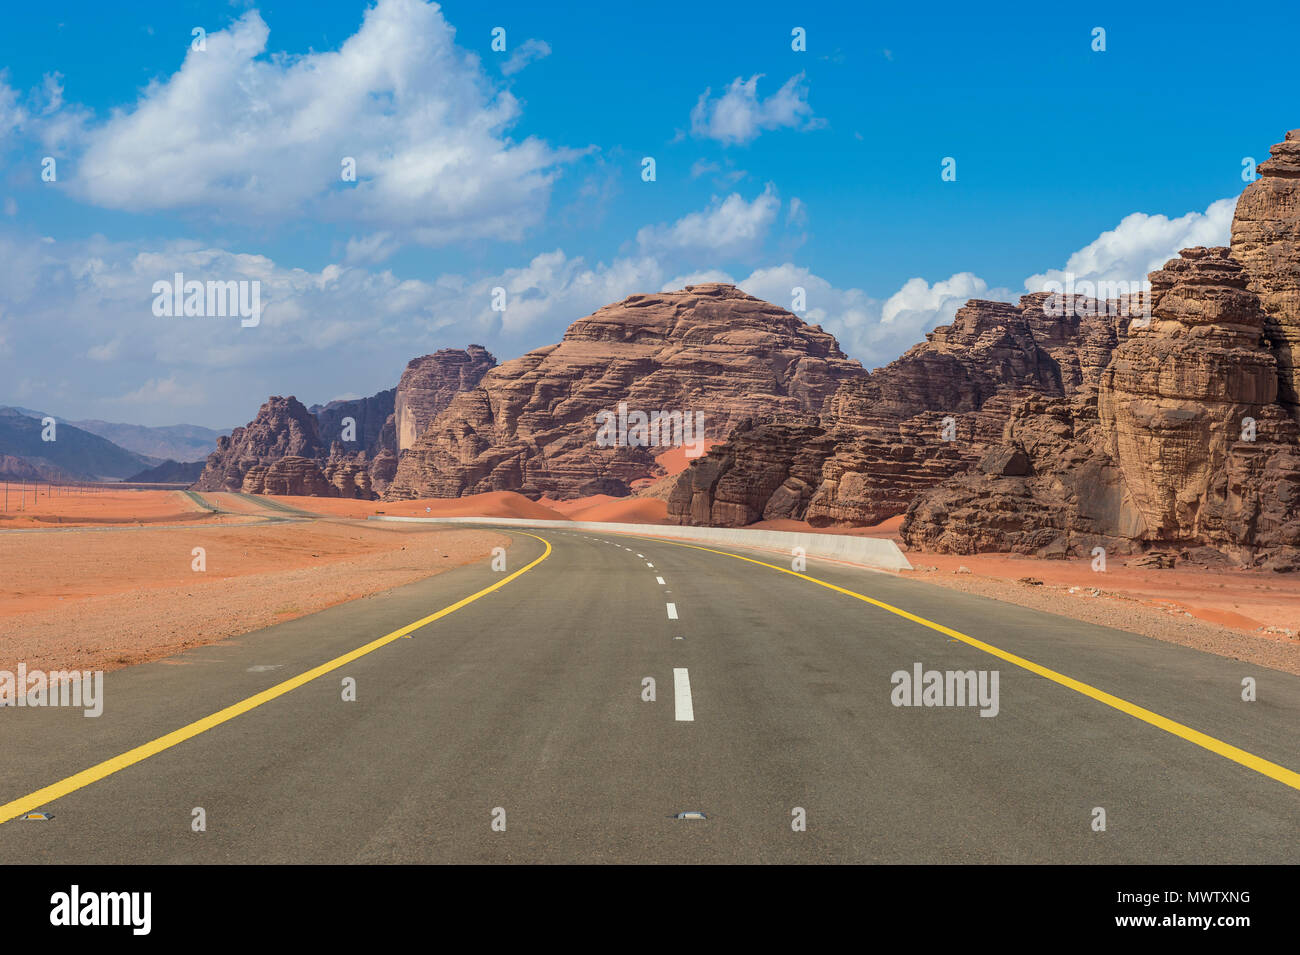 Road leading through the beautiful scenery in the northern territories of Saudi Arabia, Middle East Stock Photo